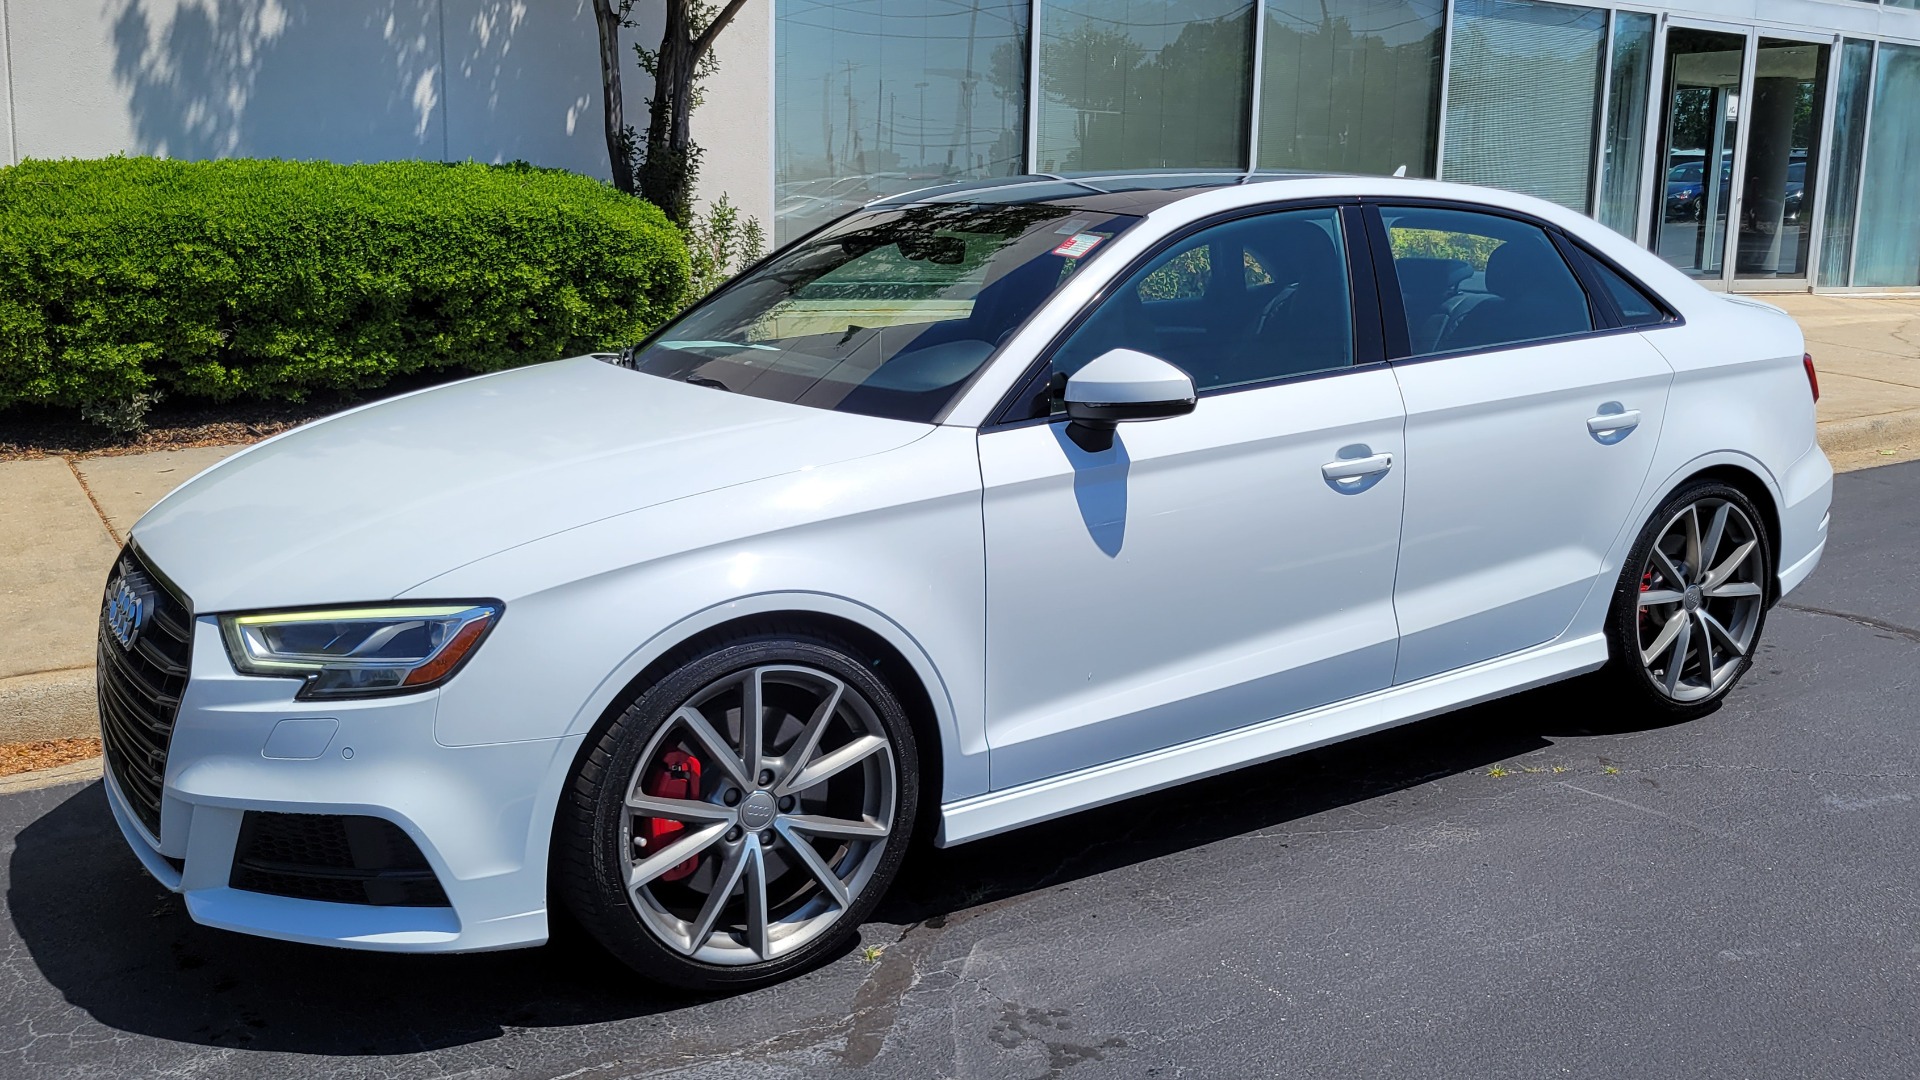 Used 2018 Audi S3 PREMIUM PLUS TECHNOLOGY / NAV / S-SPORT / BLACK OPTIC / B&O SND / REARVIEW for sale $39,995 at Formula Imports in Charlotte NC 28227 1